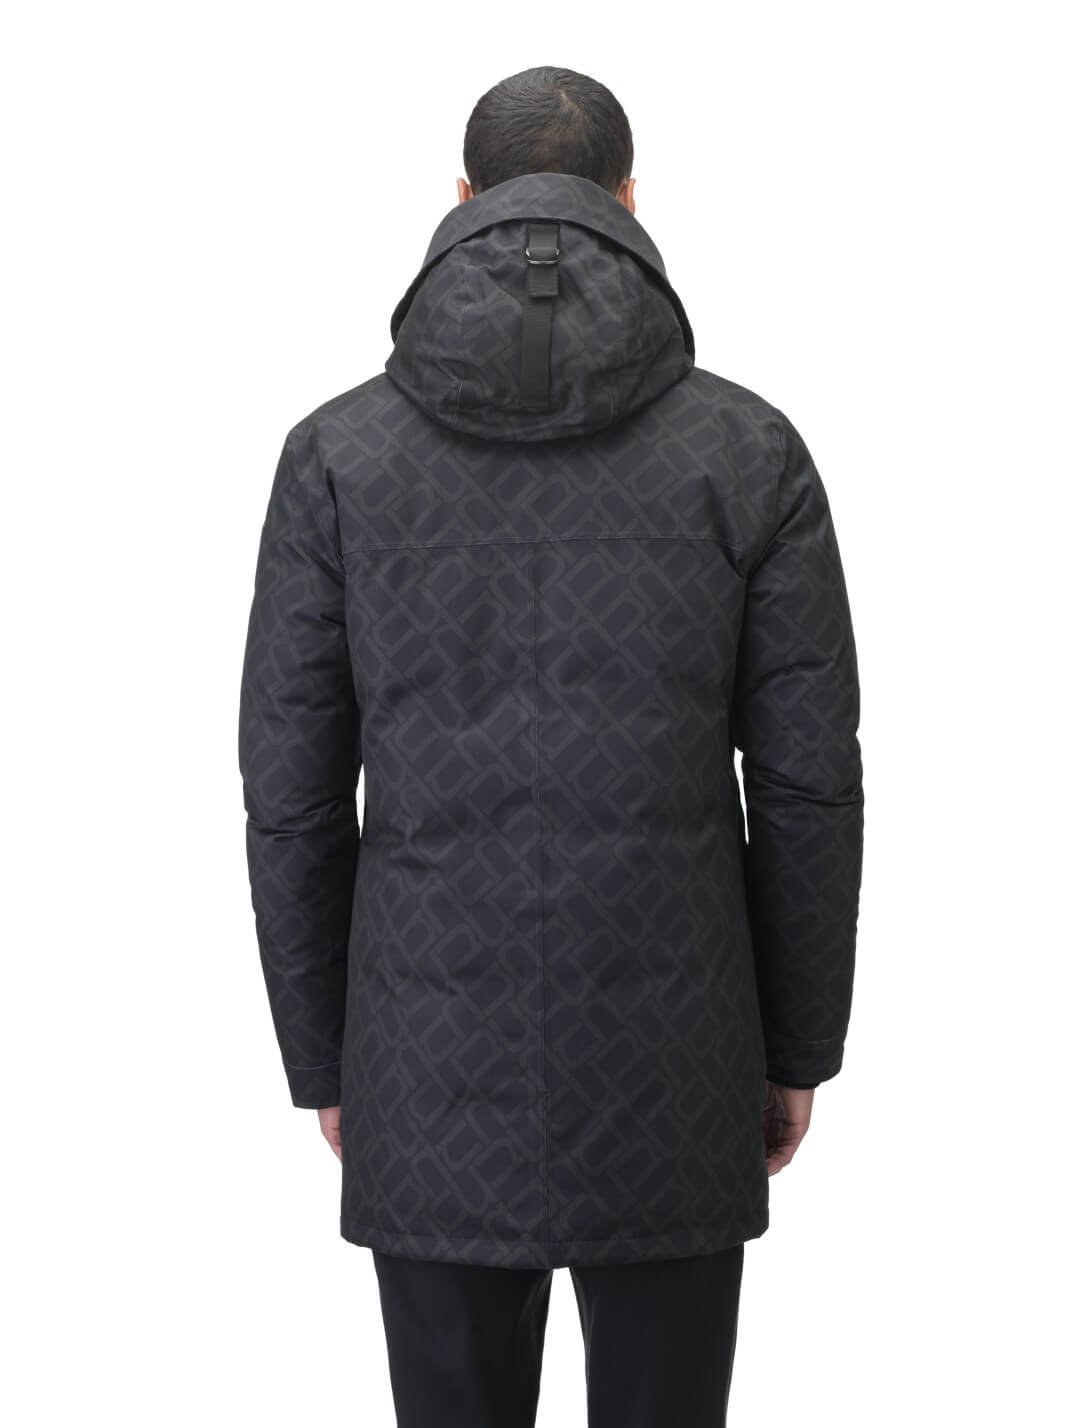 Men's slim fitting waist length parka with removable fur trim on the hood and two waist patch pockets in Dark Monogram